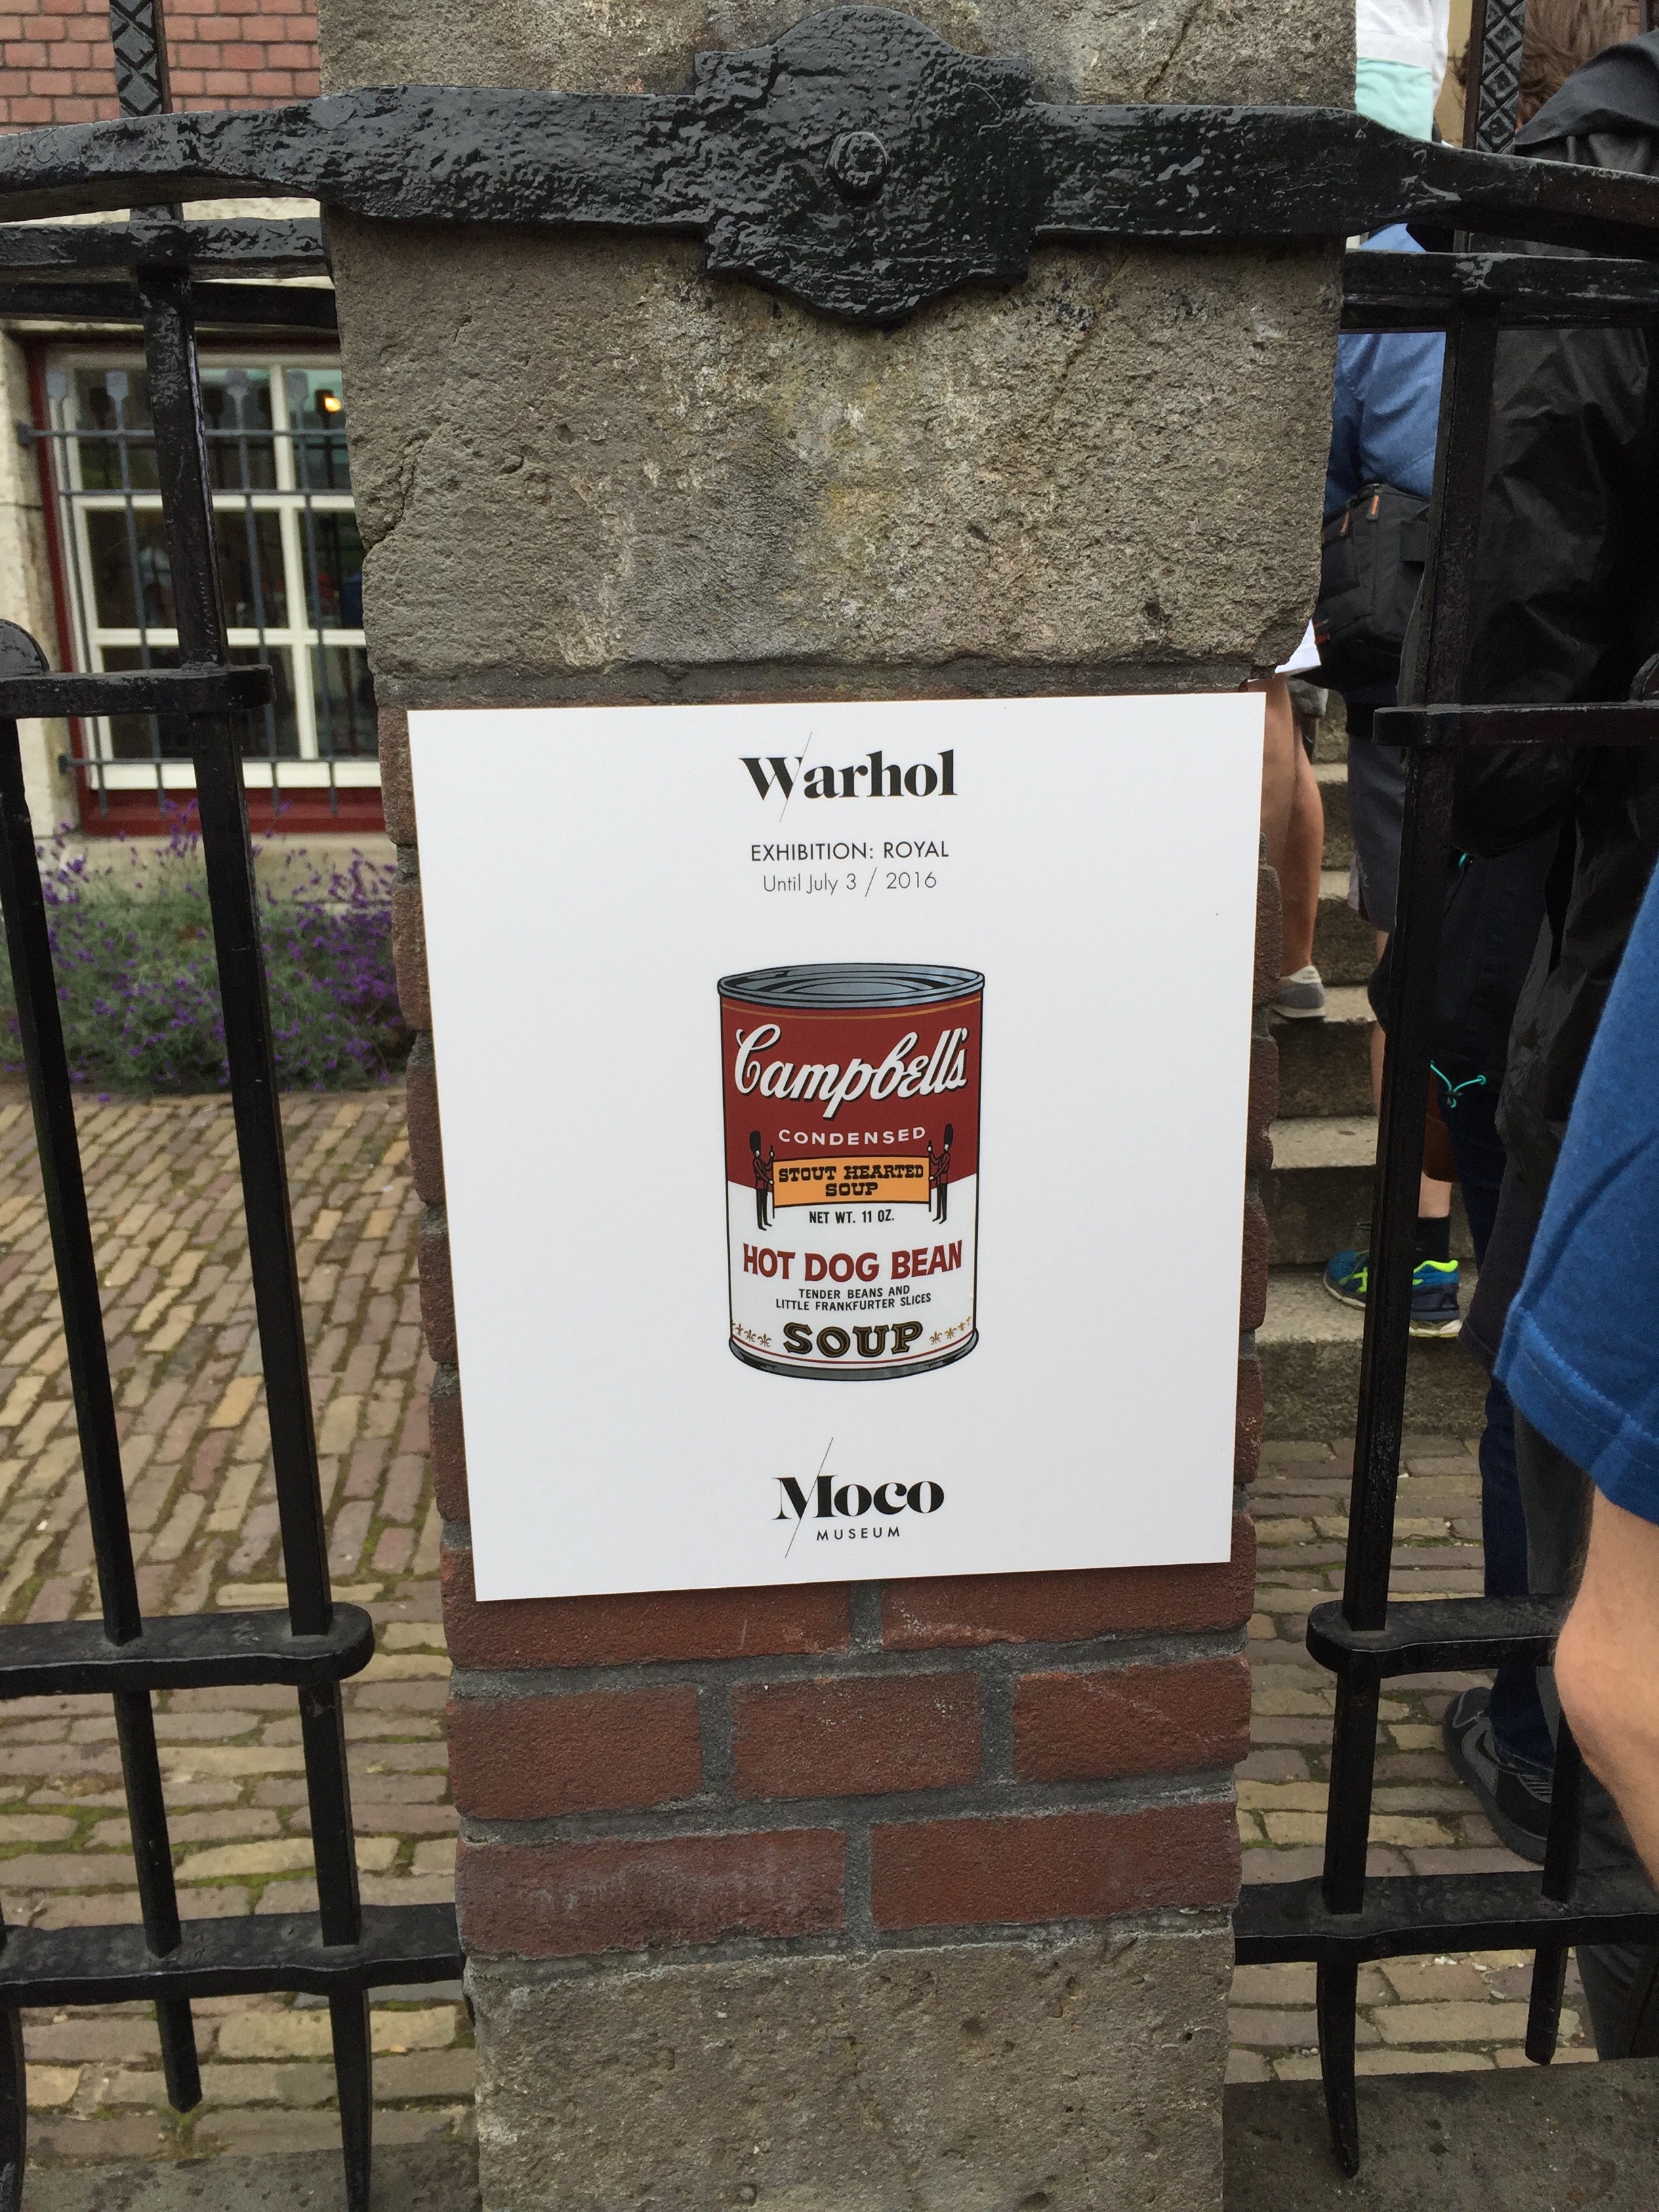 Moco Museum Warhol Campbell's Soup sign on the fence post outside of the museum in Amsterdam